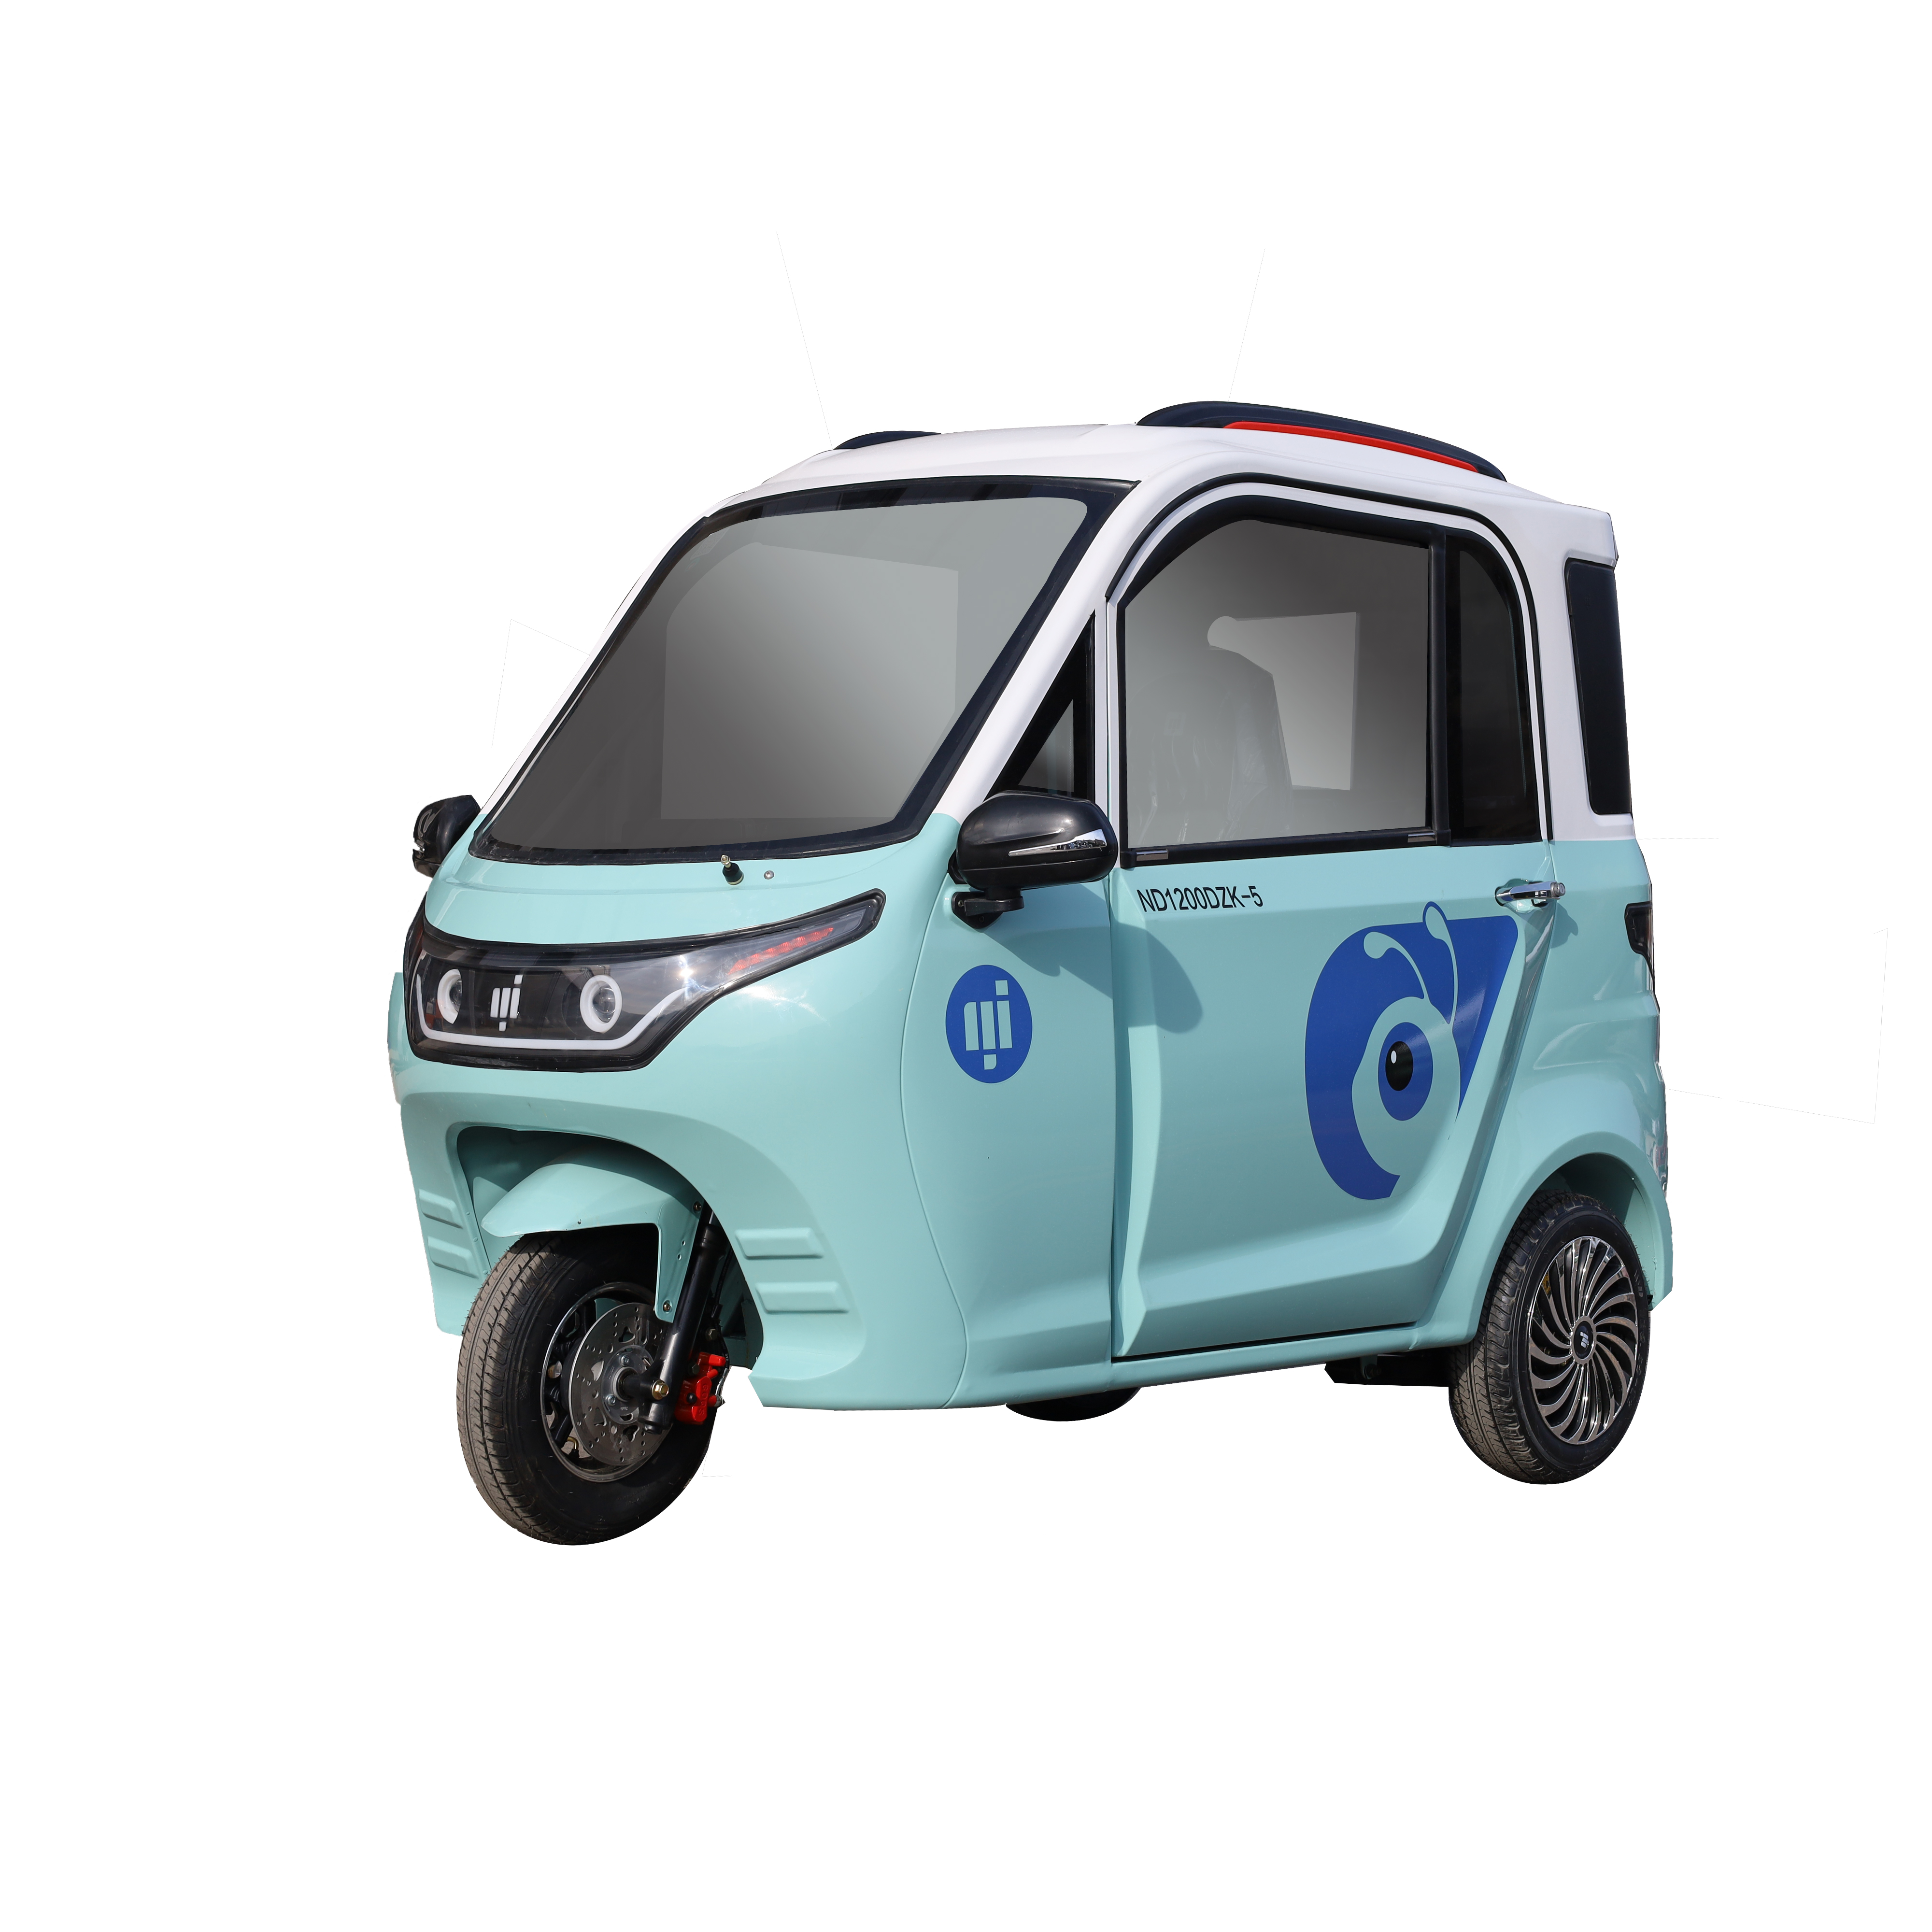 Cheap Energy Closed Body City Electric Car Small Electric Vehicle for Adults